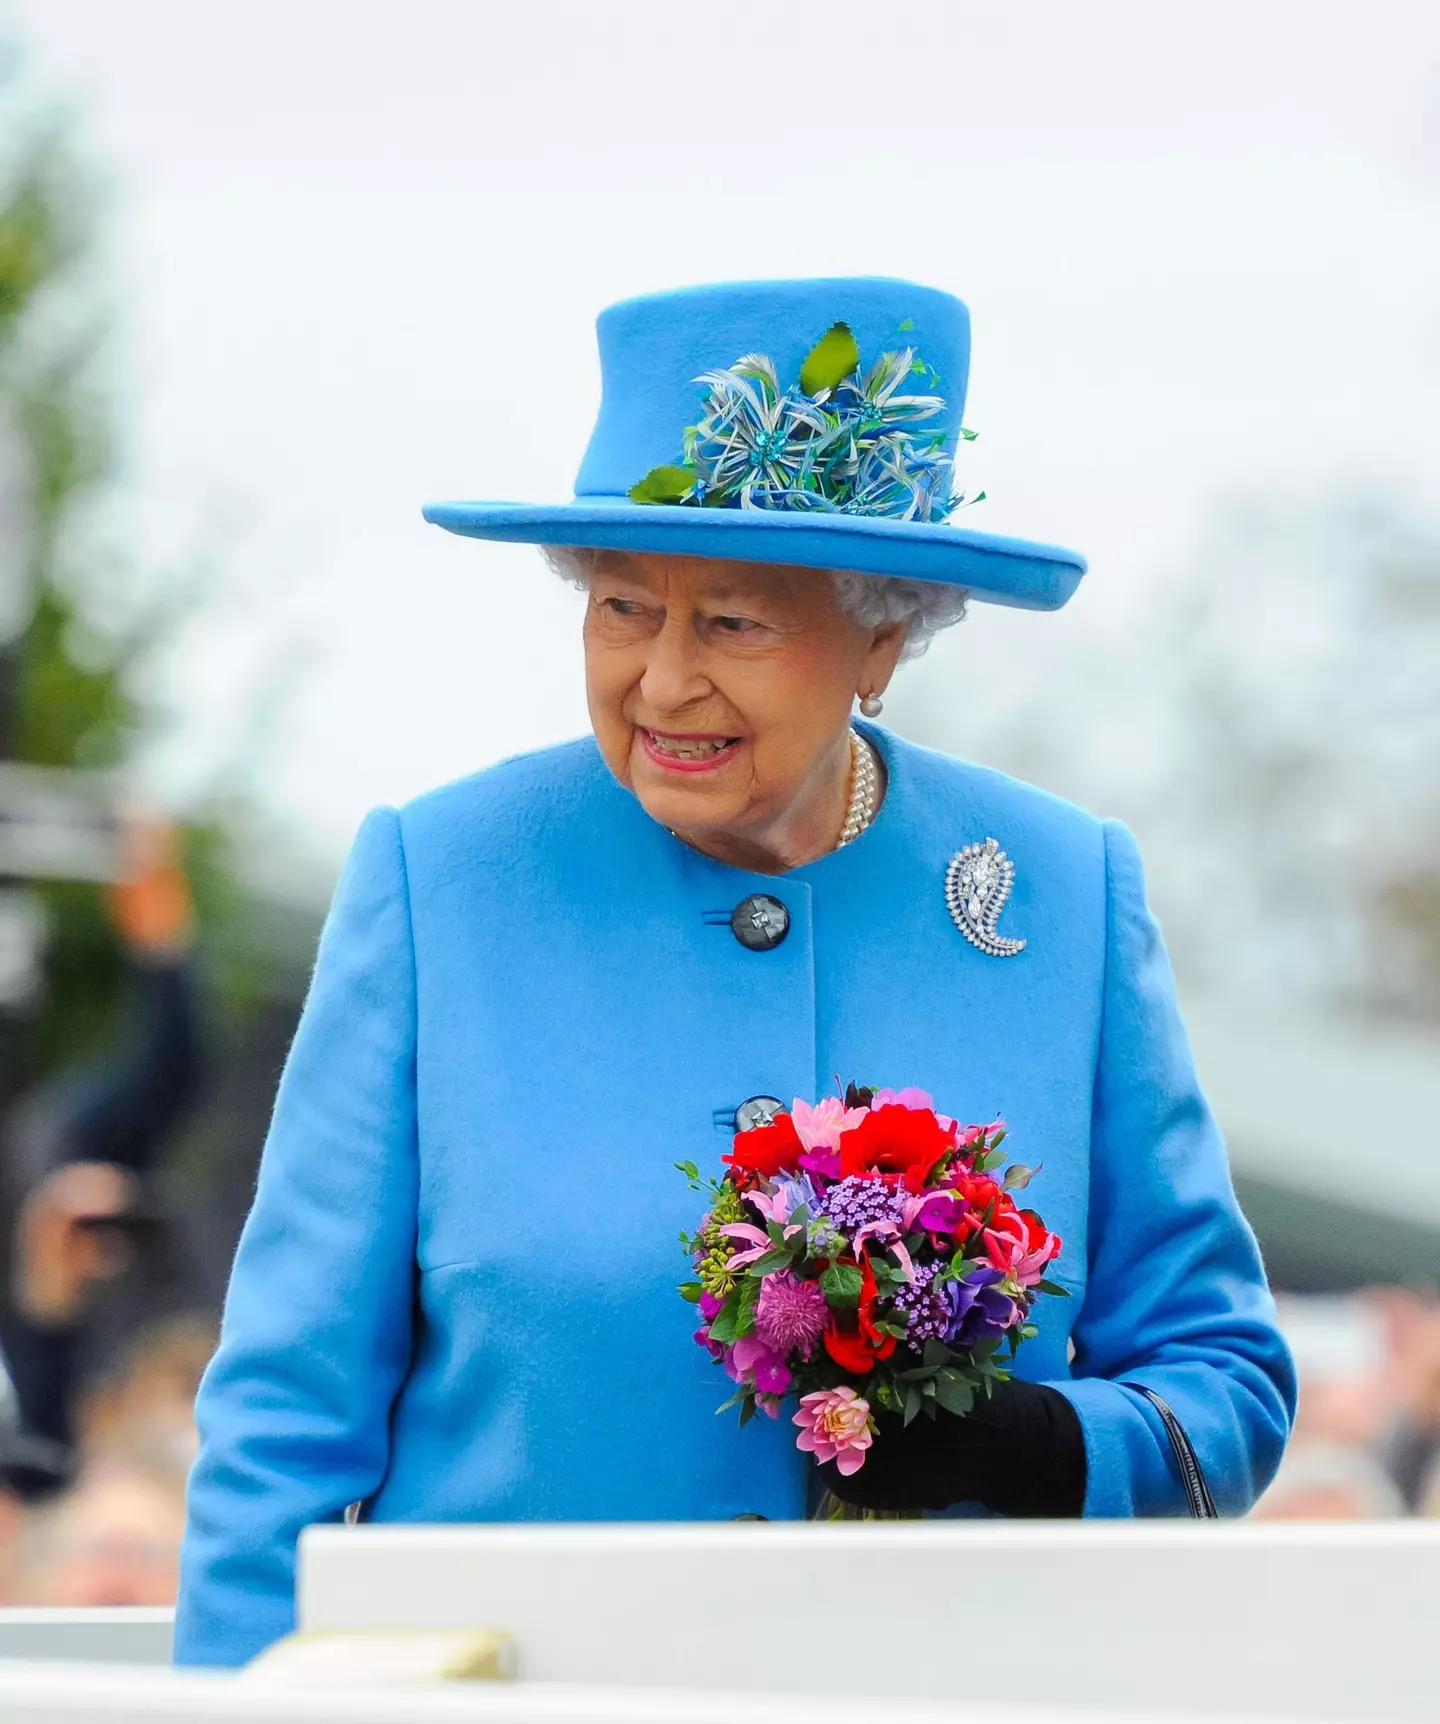 The Queen’s cause of death has officially been announced.